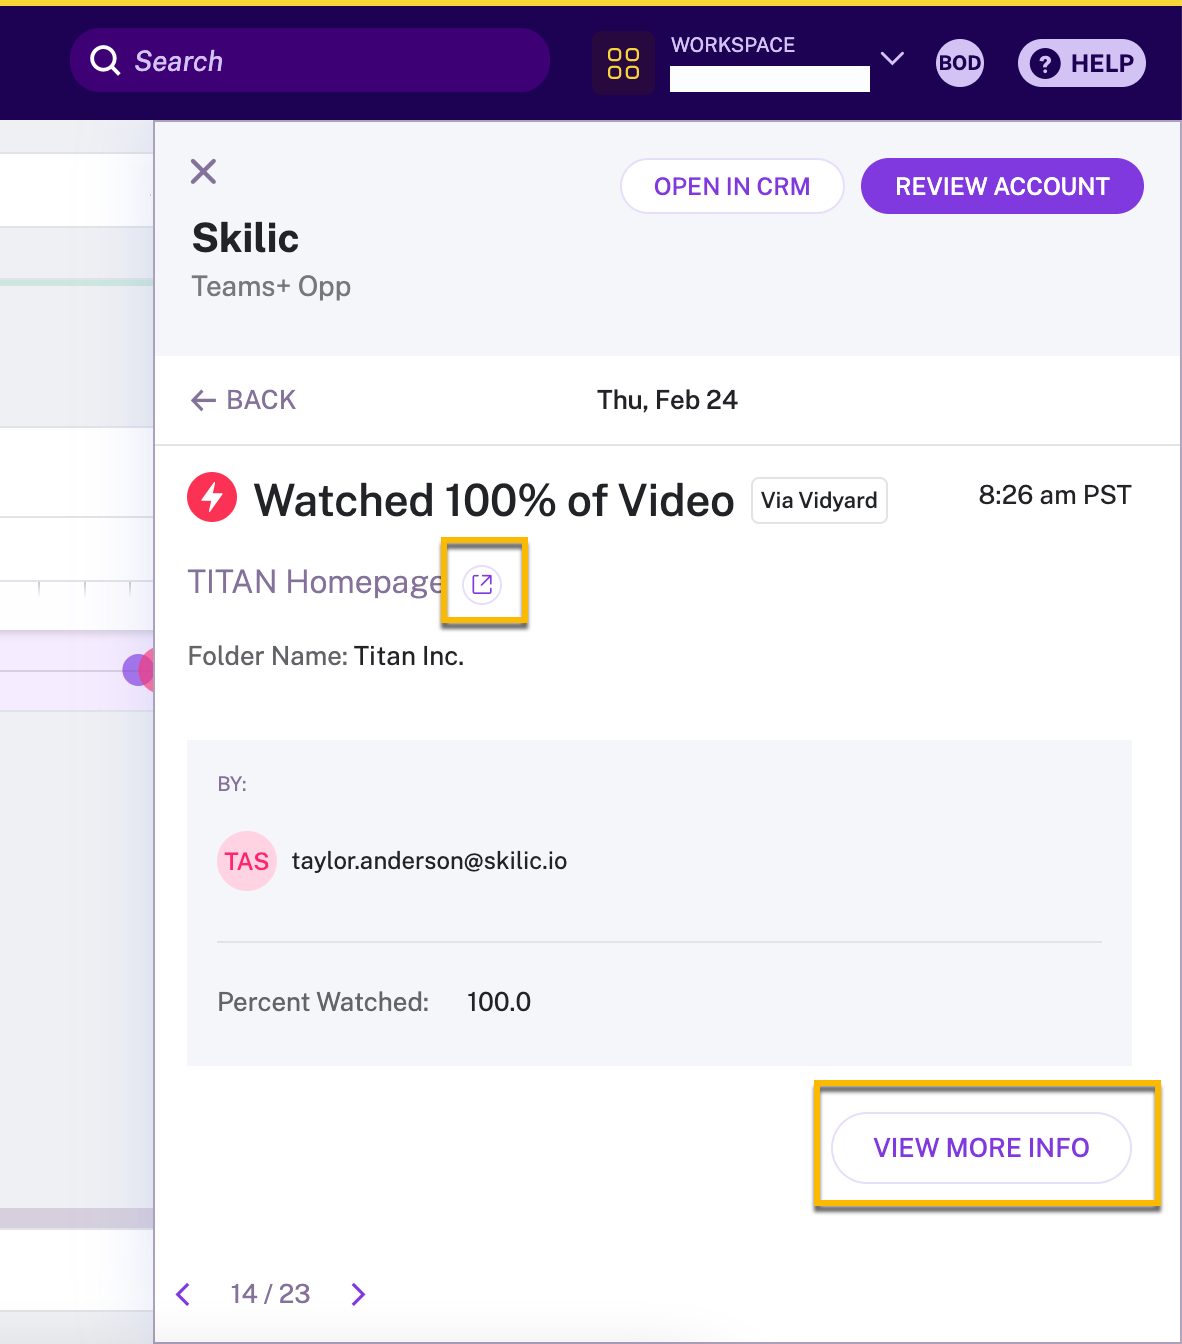 Highlighting the two links within a video engagement event: one to the video's sharing page, another to the edit page for the video in Vidyard